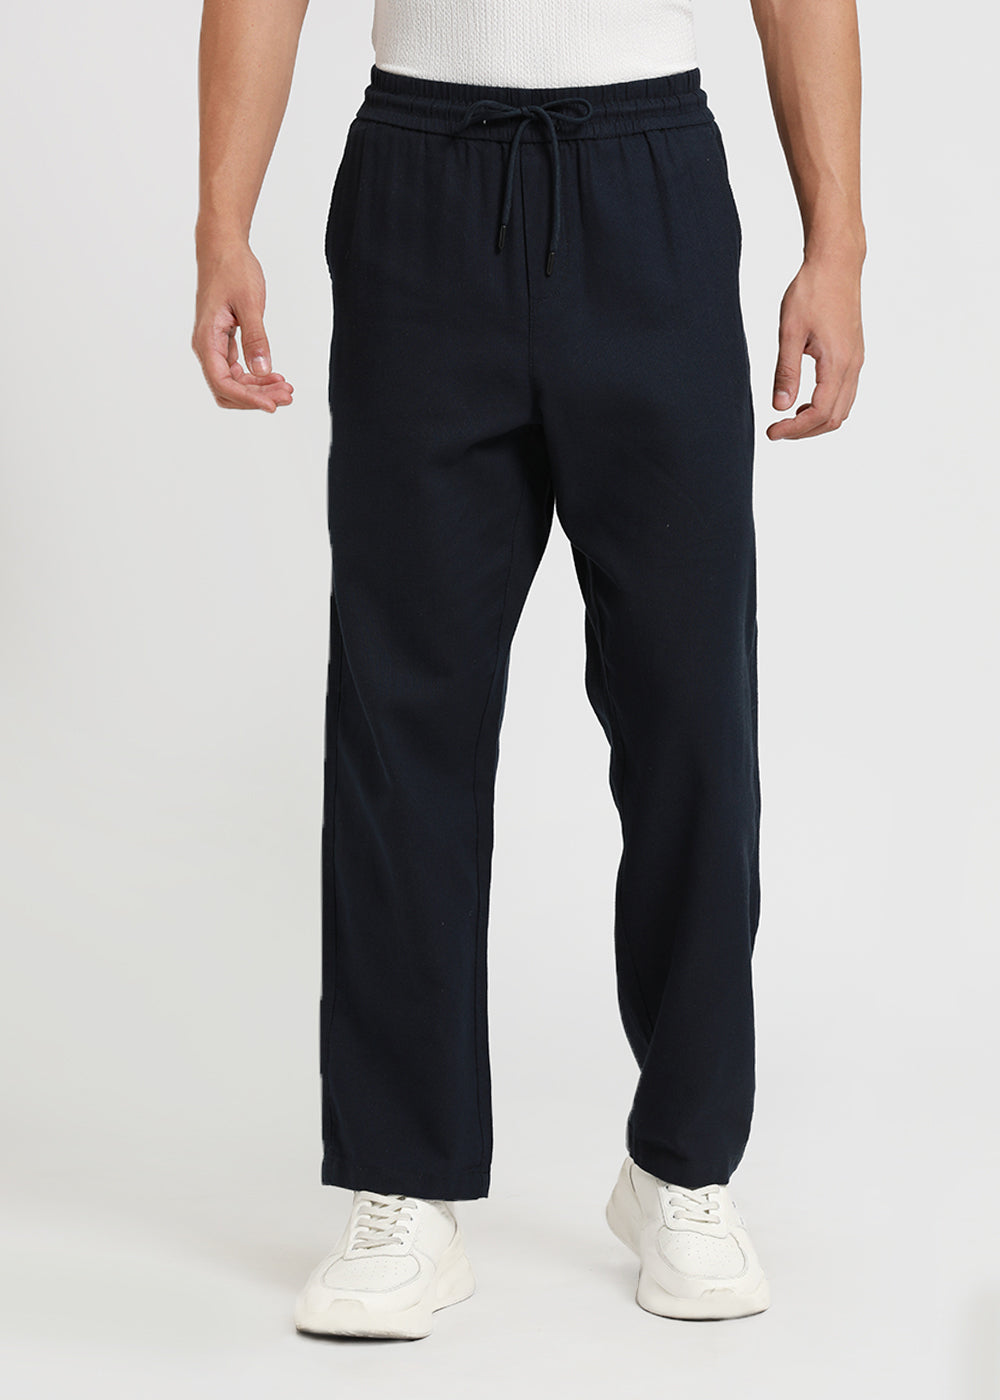 Prussian Blue Textured Pants